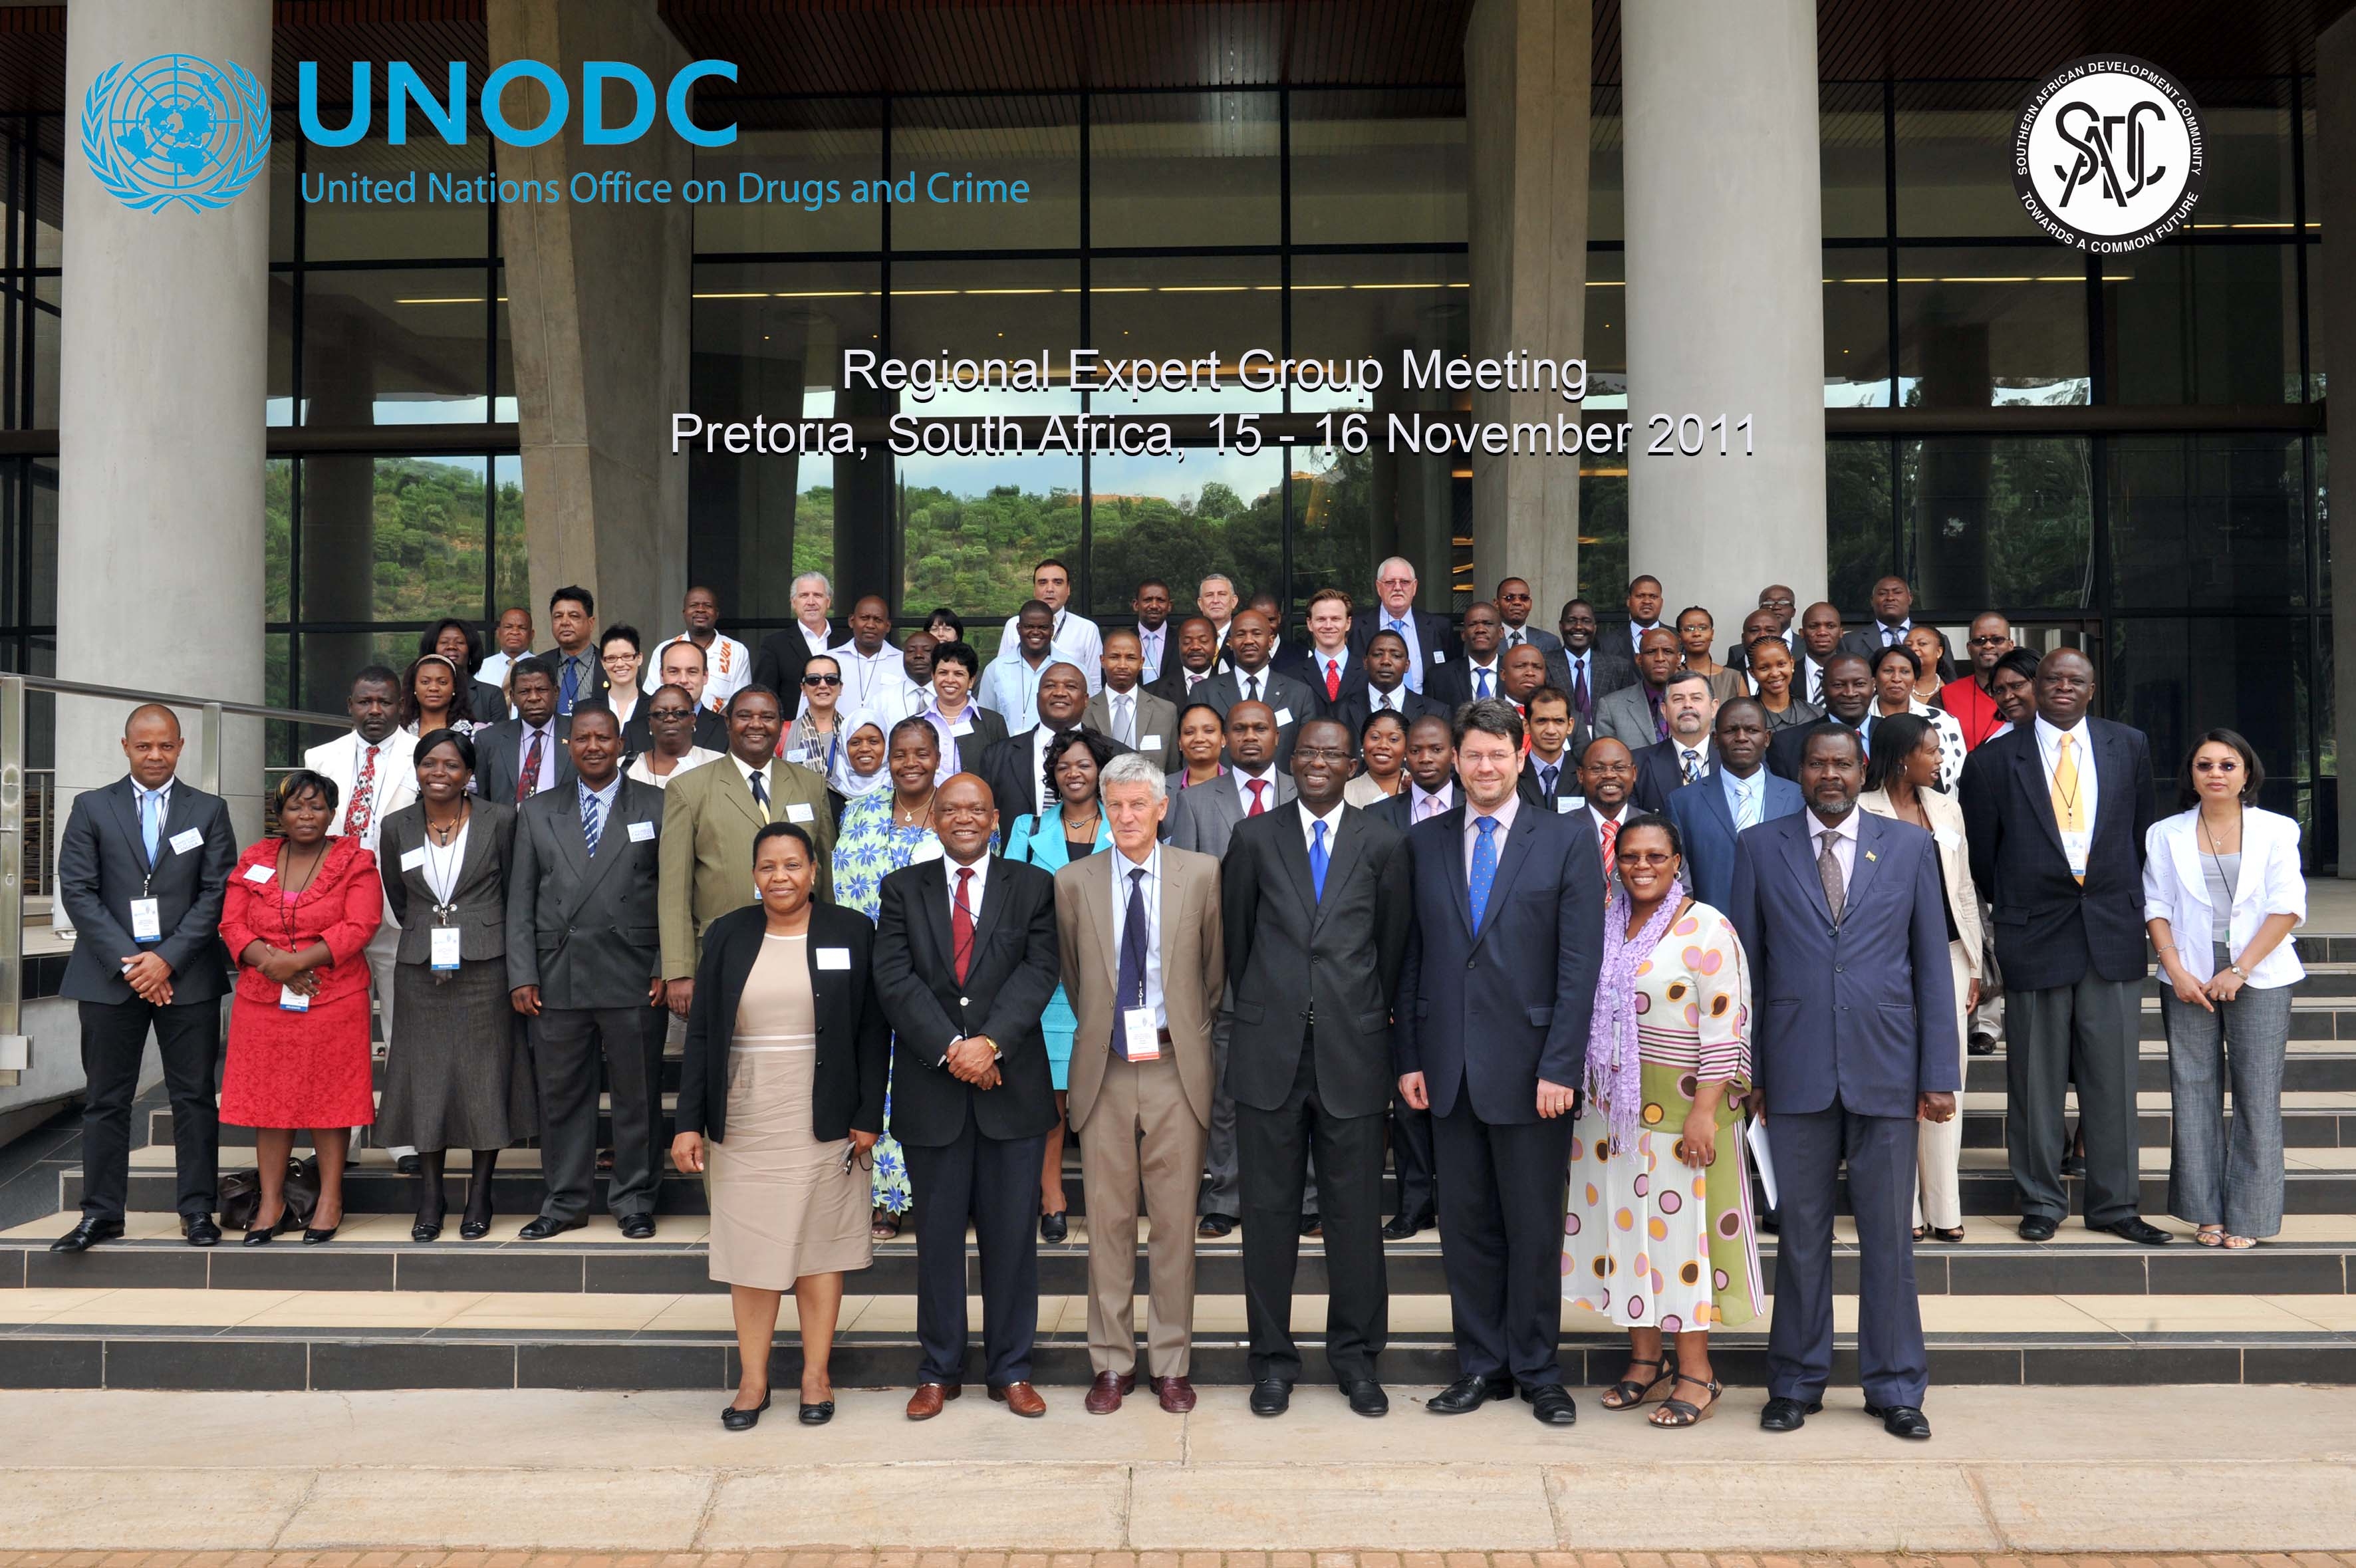 Delegates of Second SADC-UNODC Expert Group Meeting - Picture: Schoonees